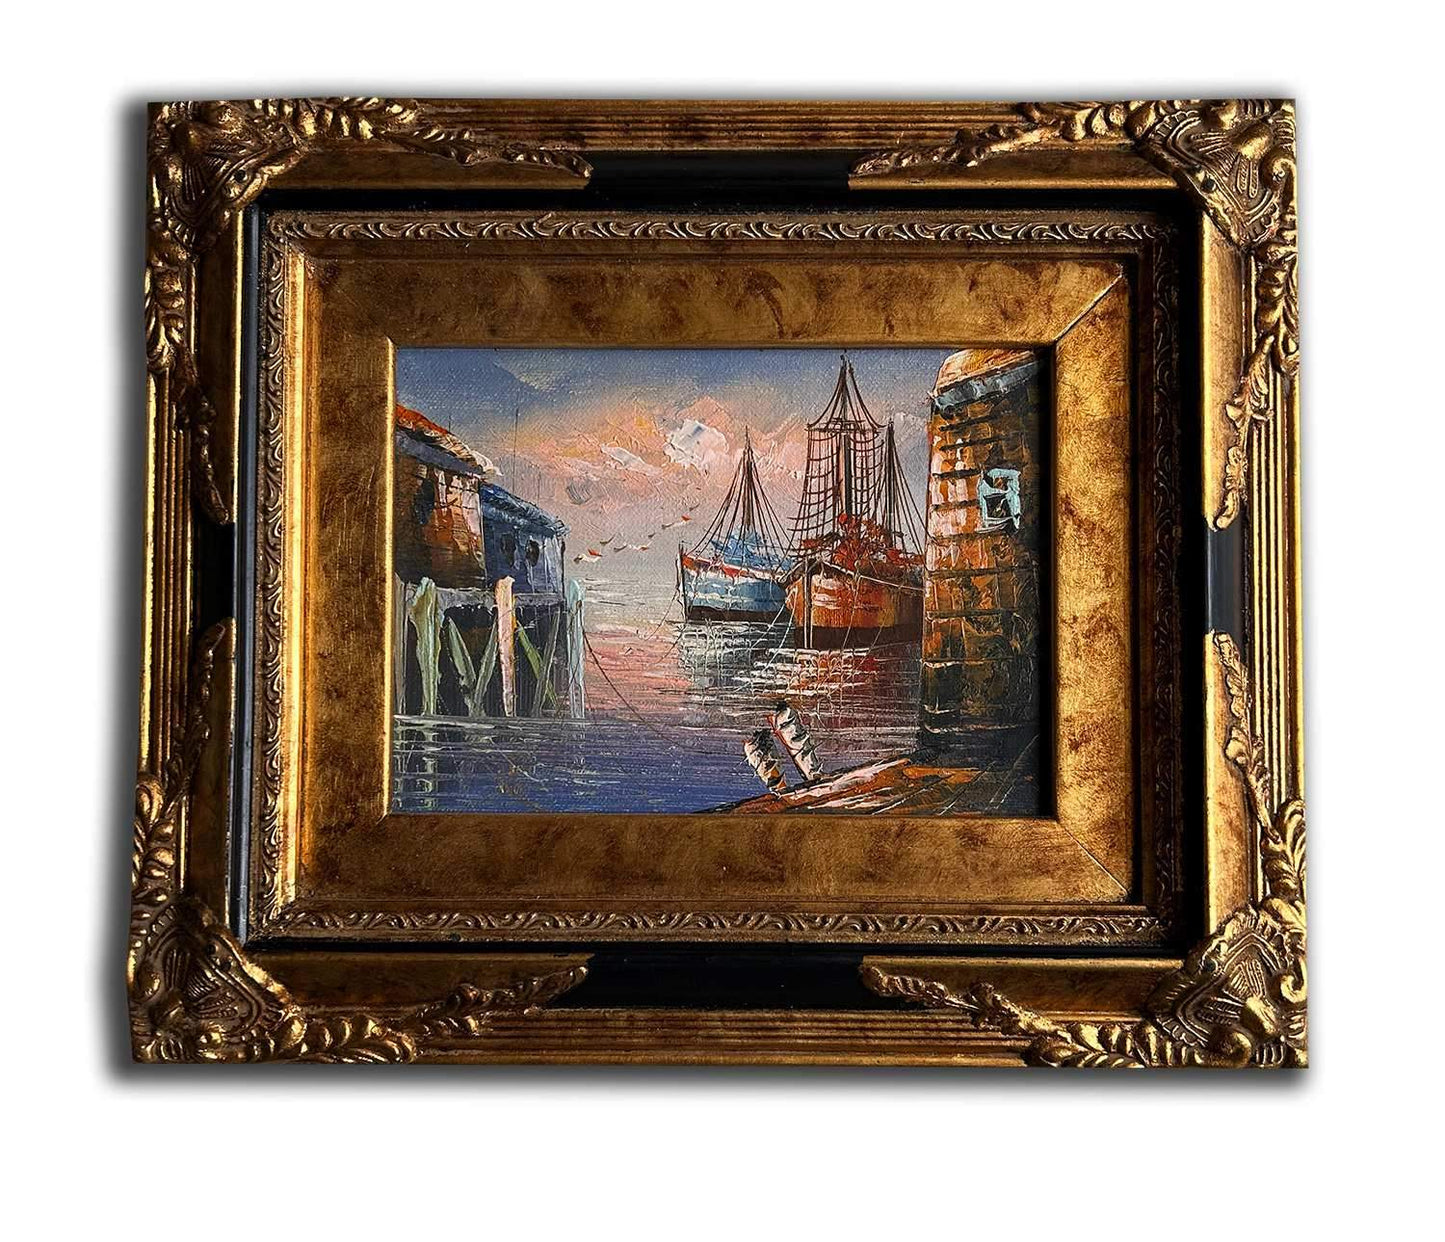 Venice and port, hand-painted 25x30 cm eller 10x12 ins